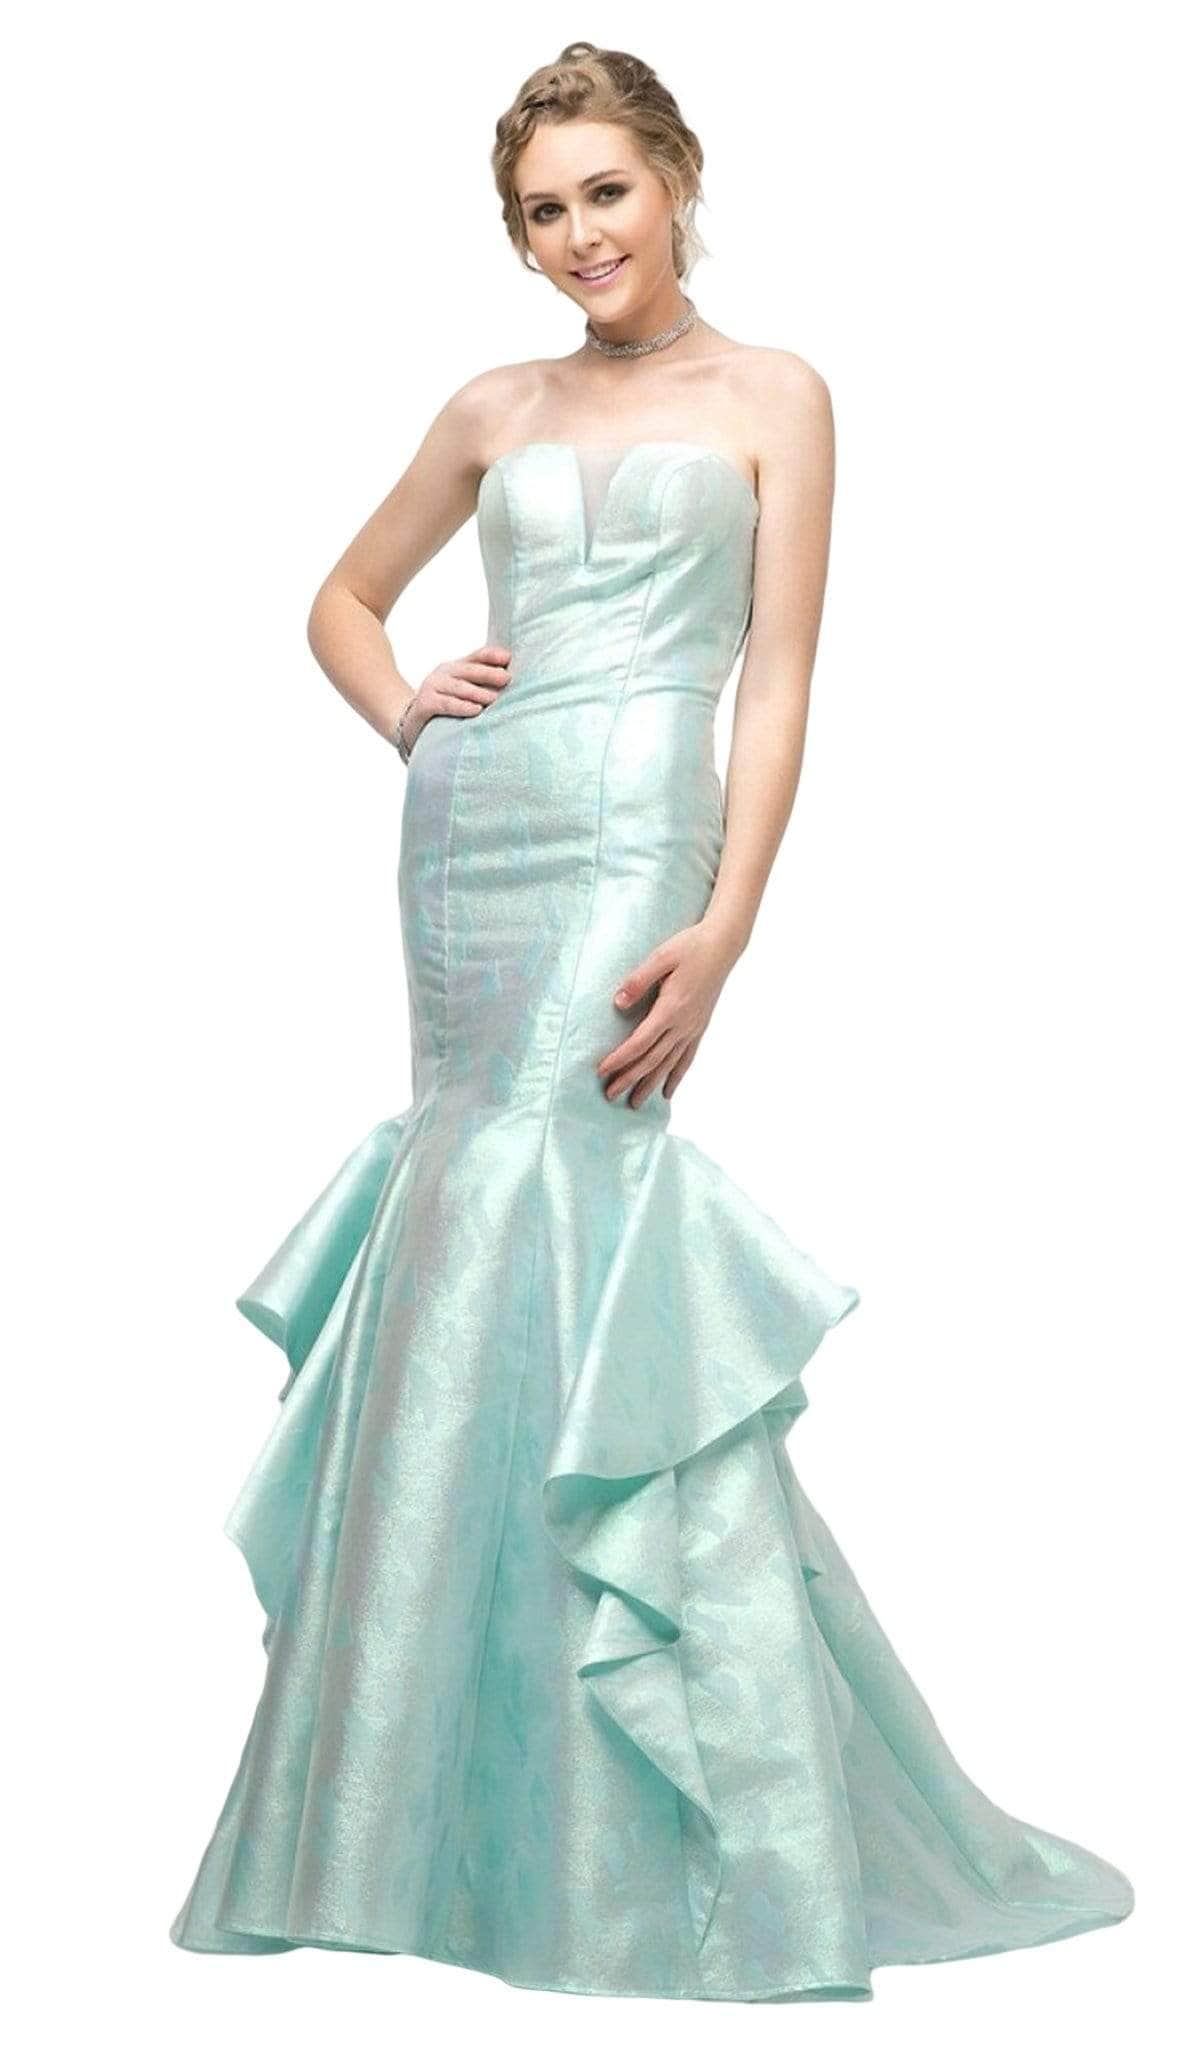 Image of Ladivine A5033 - Jacquard Layered Strapless Mermaid Gown